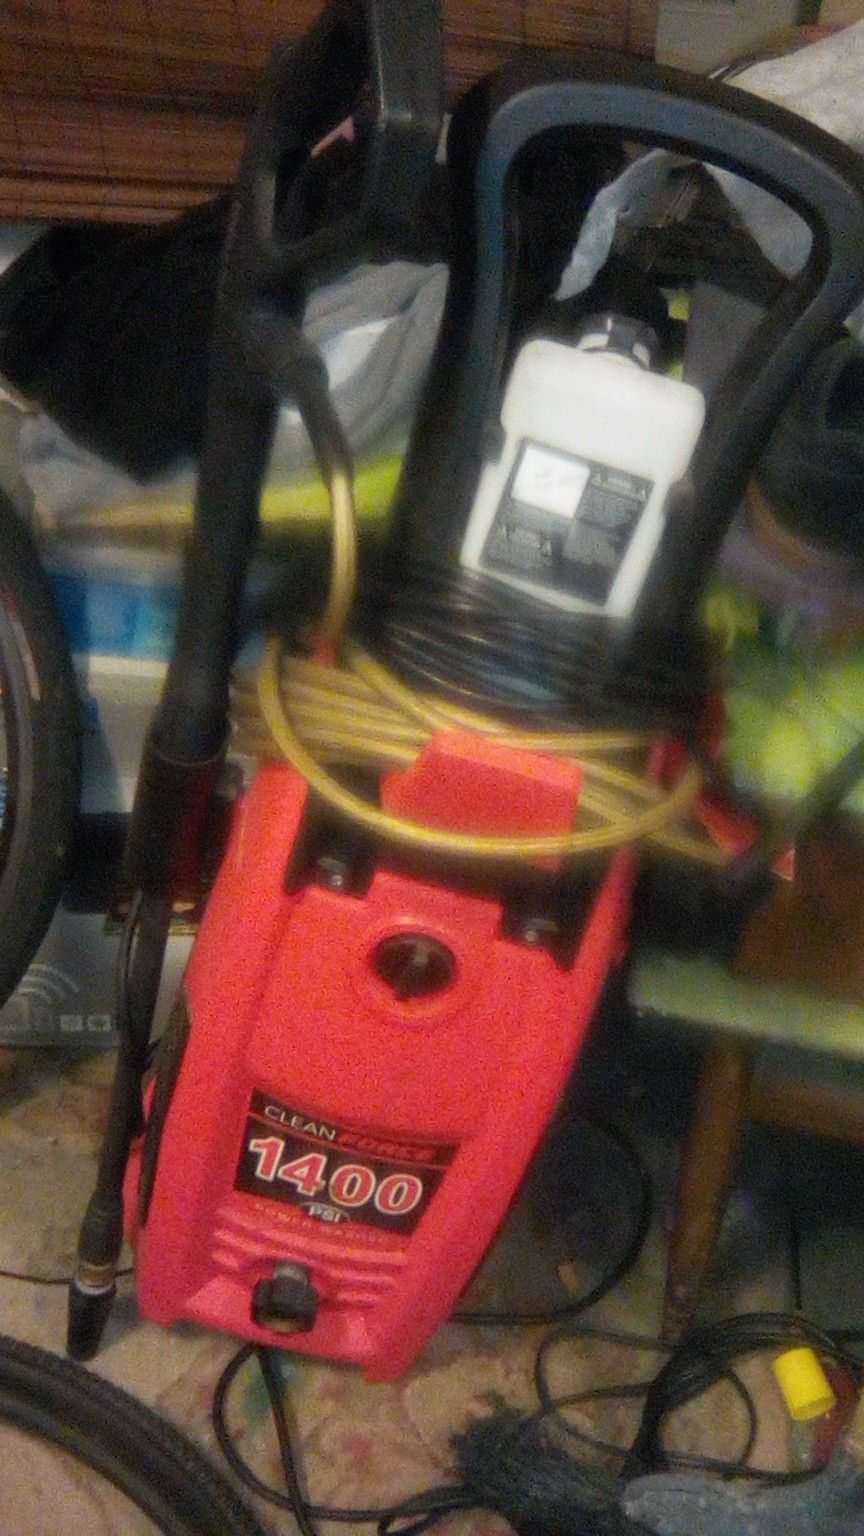 Power Washer clean force 1400 psi